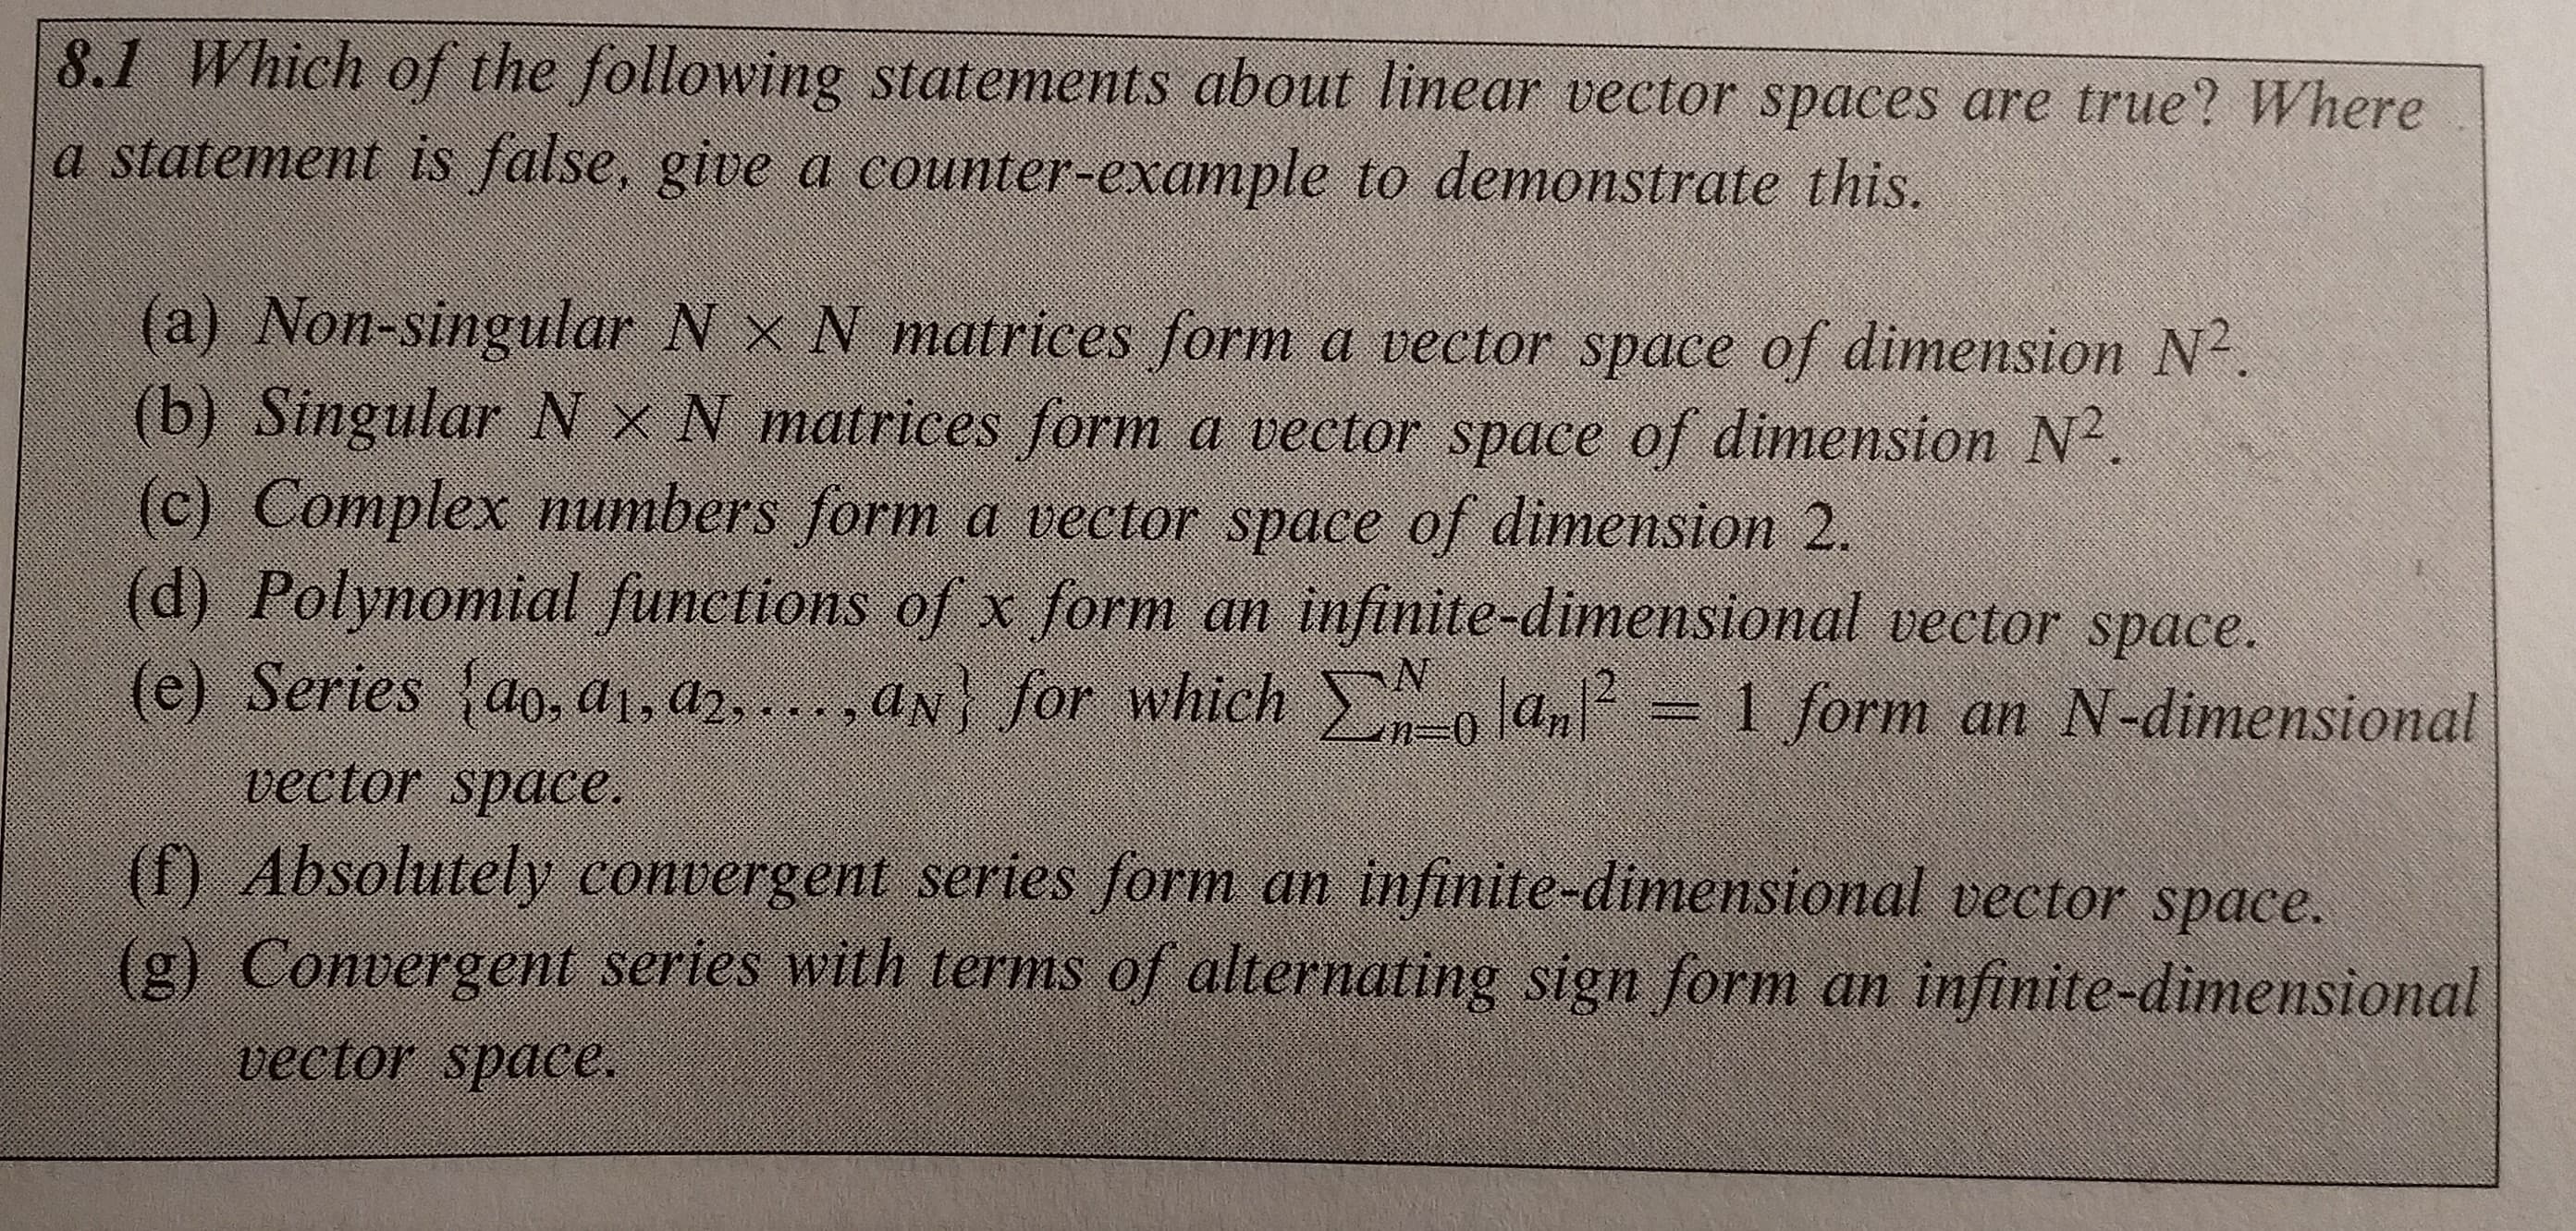 8.1 Which of the following statements about linear vector spaces are true? Where
a statement is false, give a counter-example to demonstrate this.
(a) Non-singular N x N matrices form a vector space of dimension N2.
Singular N x N matrices form a vector space of dimension N2.
Complex numbers form a vector space of dimension 2.
(d) Polynomial functions of
(e) Series fao, a1, a2, . . . , aN for which la,= 1
x form an infinite-dimensional vector space.
form an N-dimensional
vector space.
Absolutely convergent series form an infinite-dimensional vector space.
Convergent series with terms of alternating sign form an infinite-dimensional
vector space.
